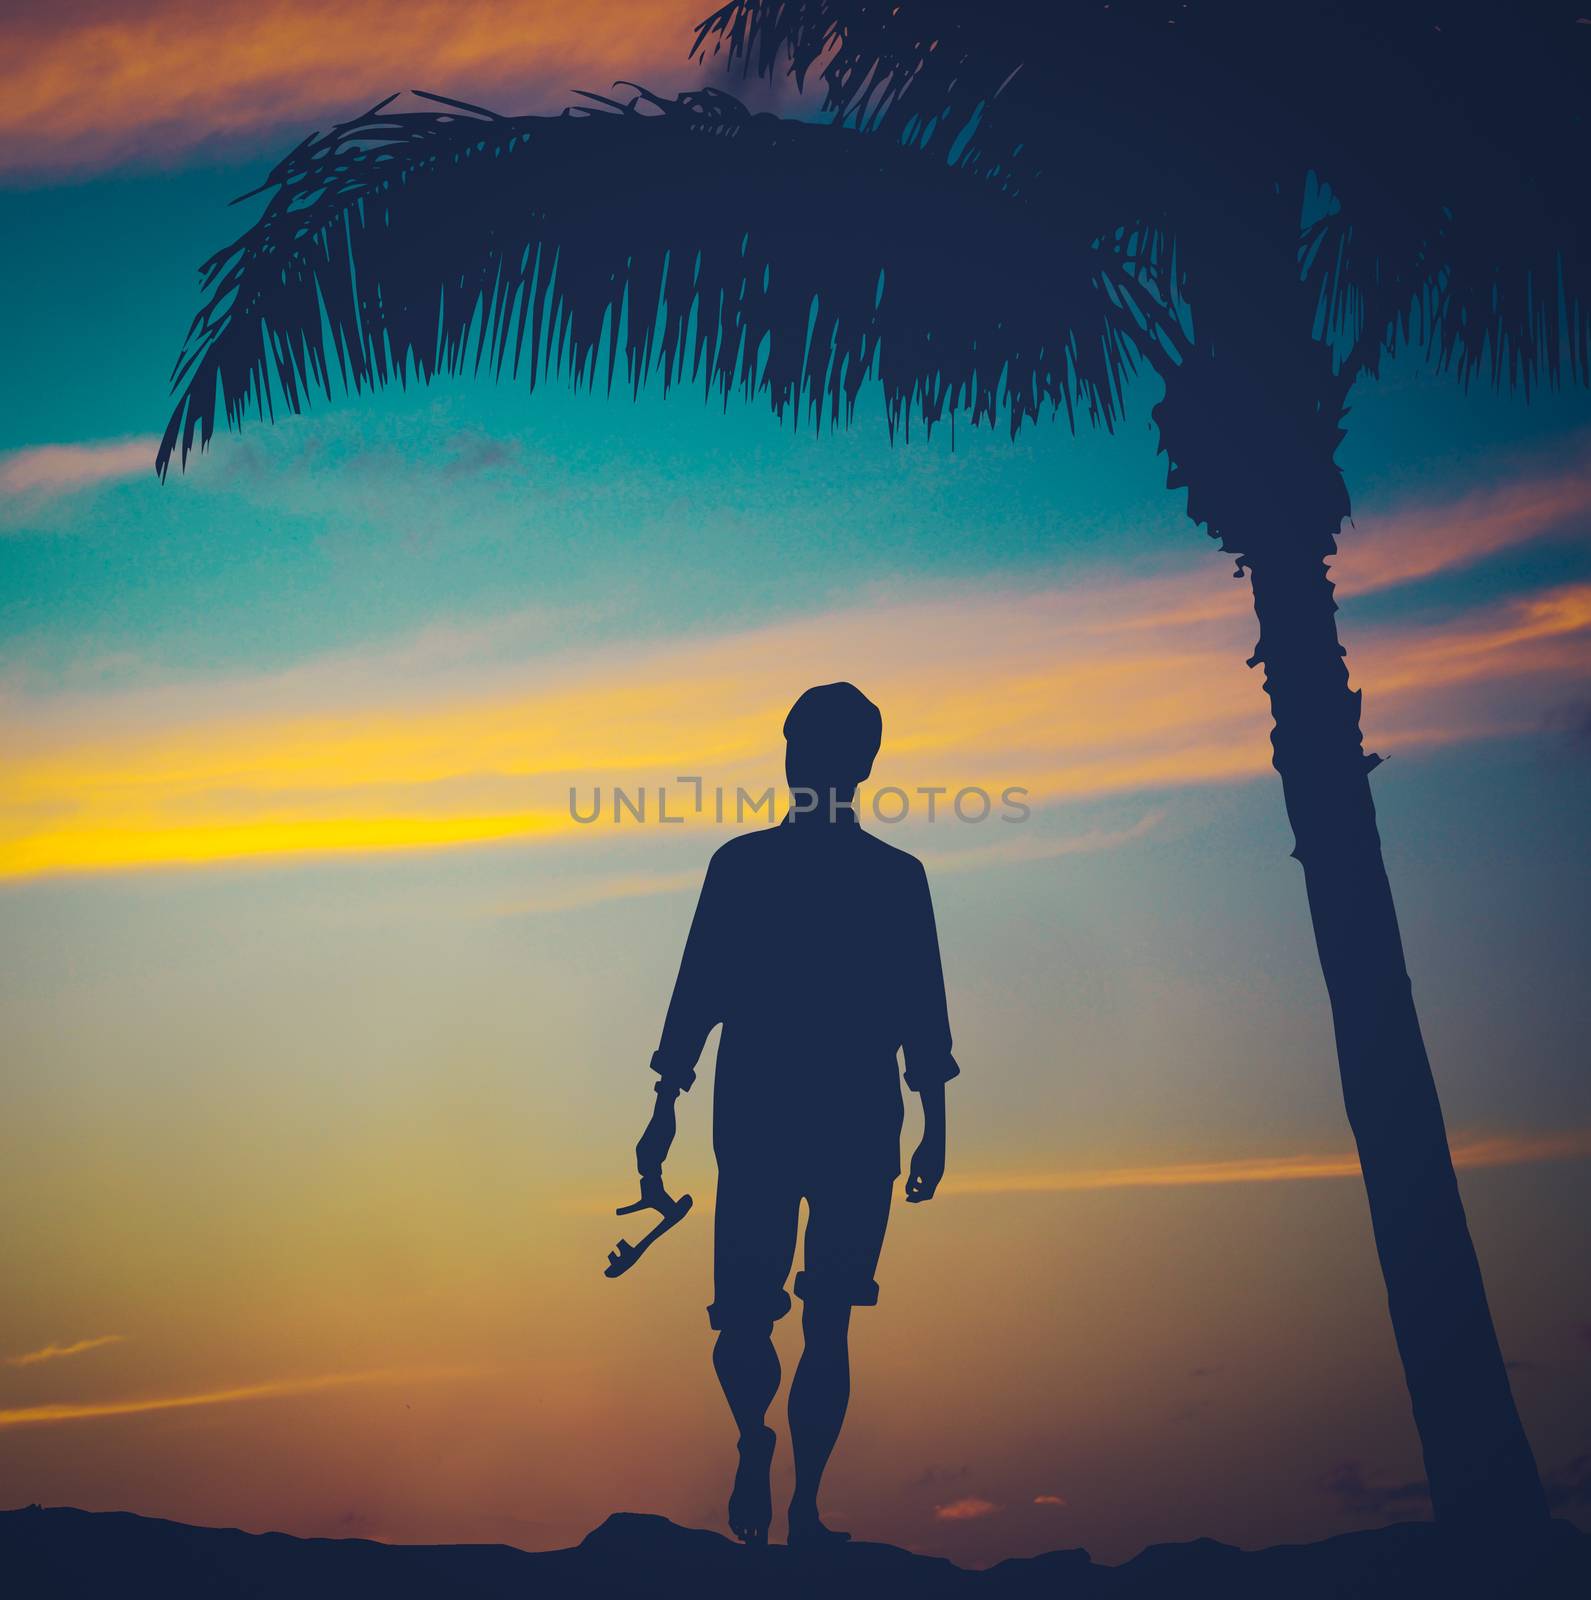 Retro Vintage Filtered Photo Of A Man Strolling On A Beach In Hawaii With Palm Tree At Sunset